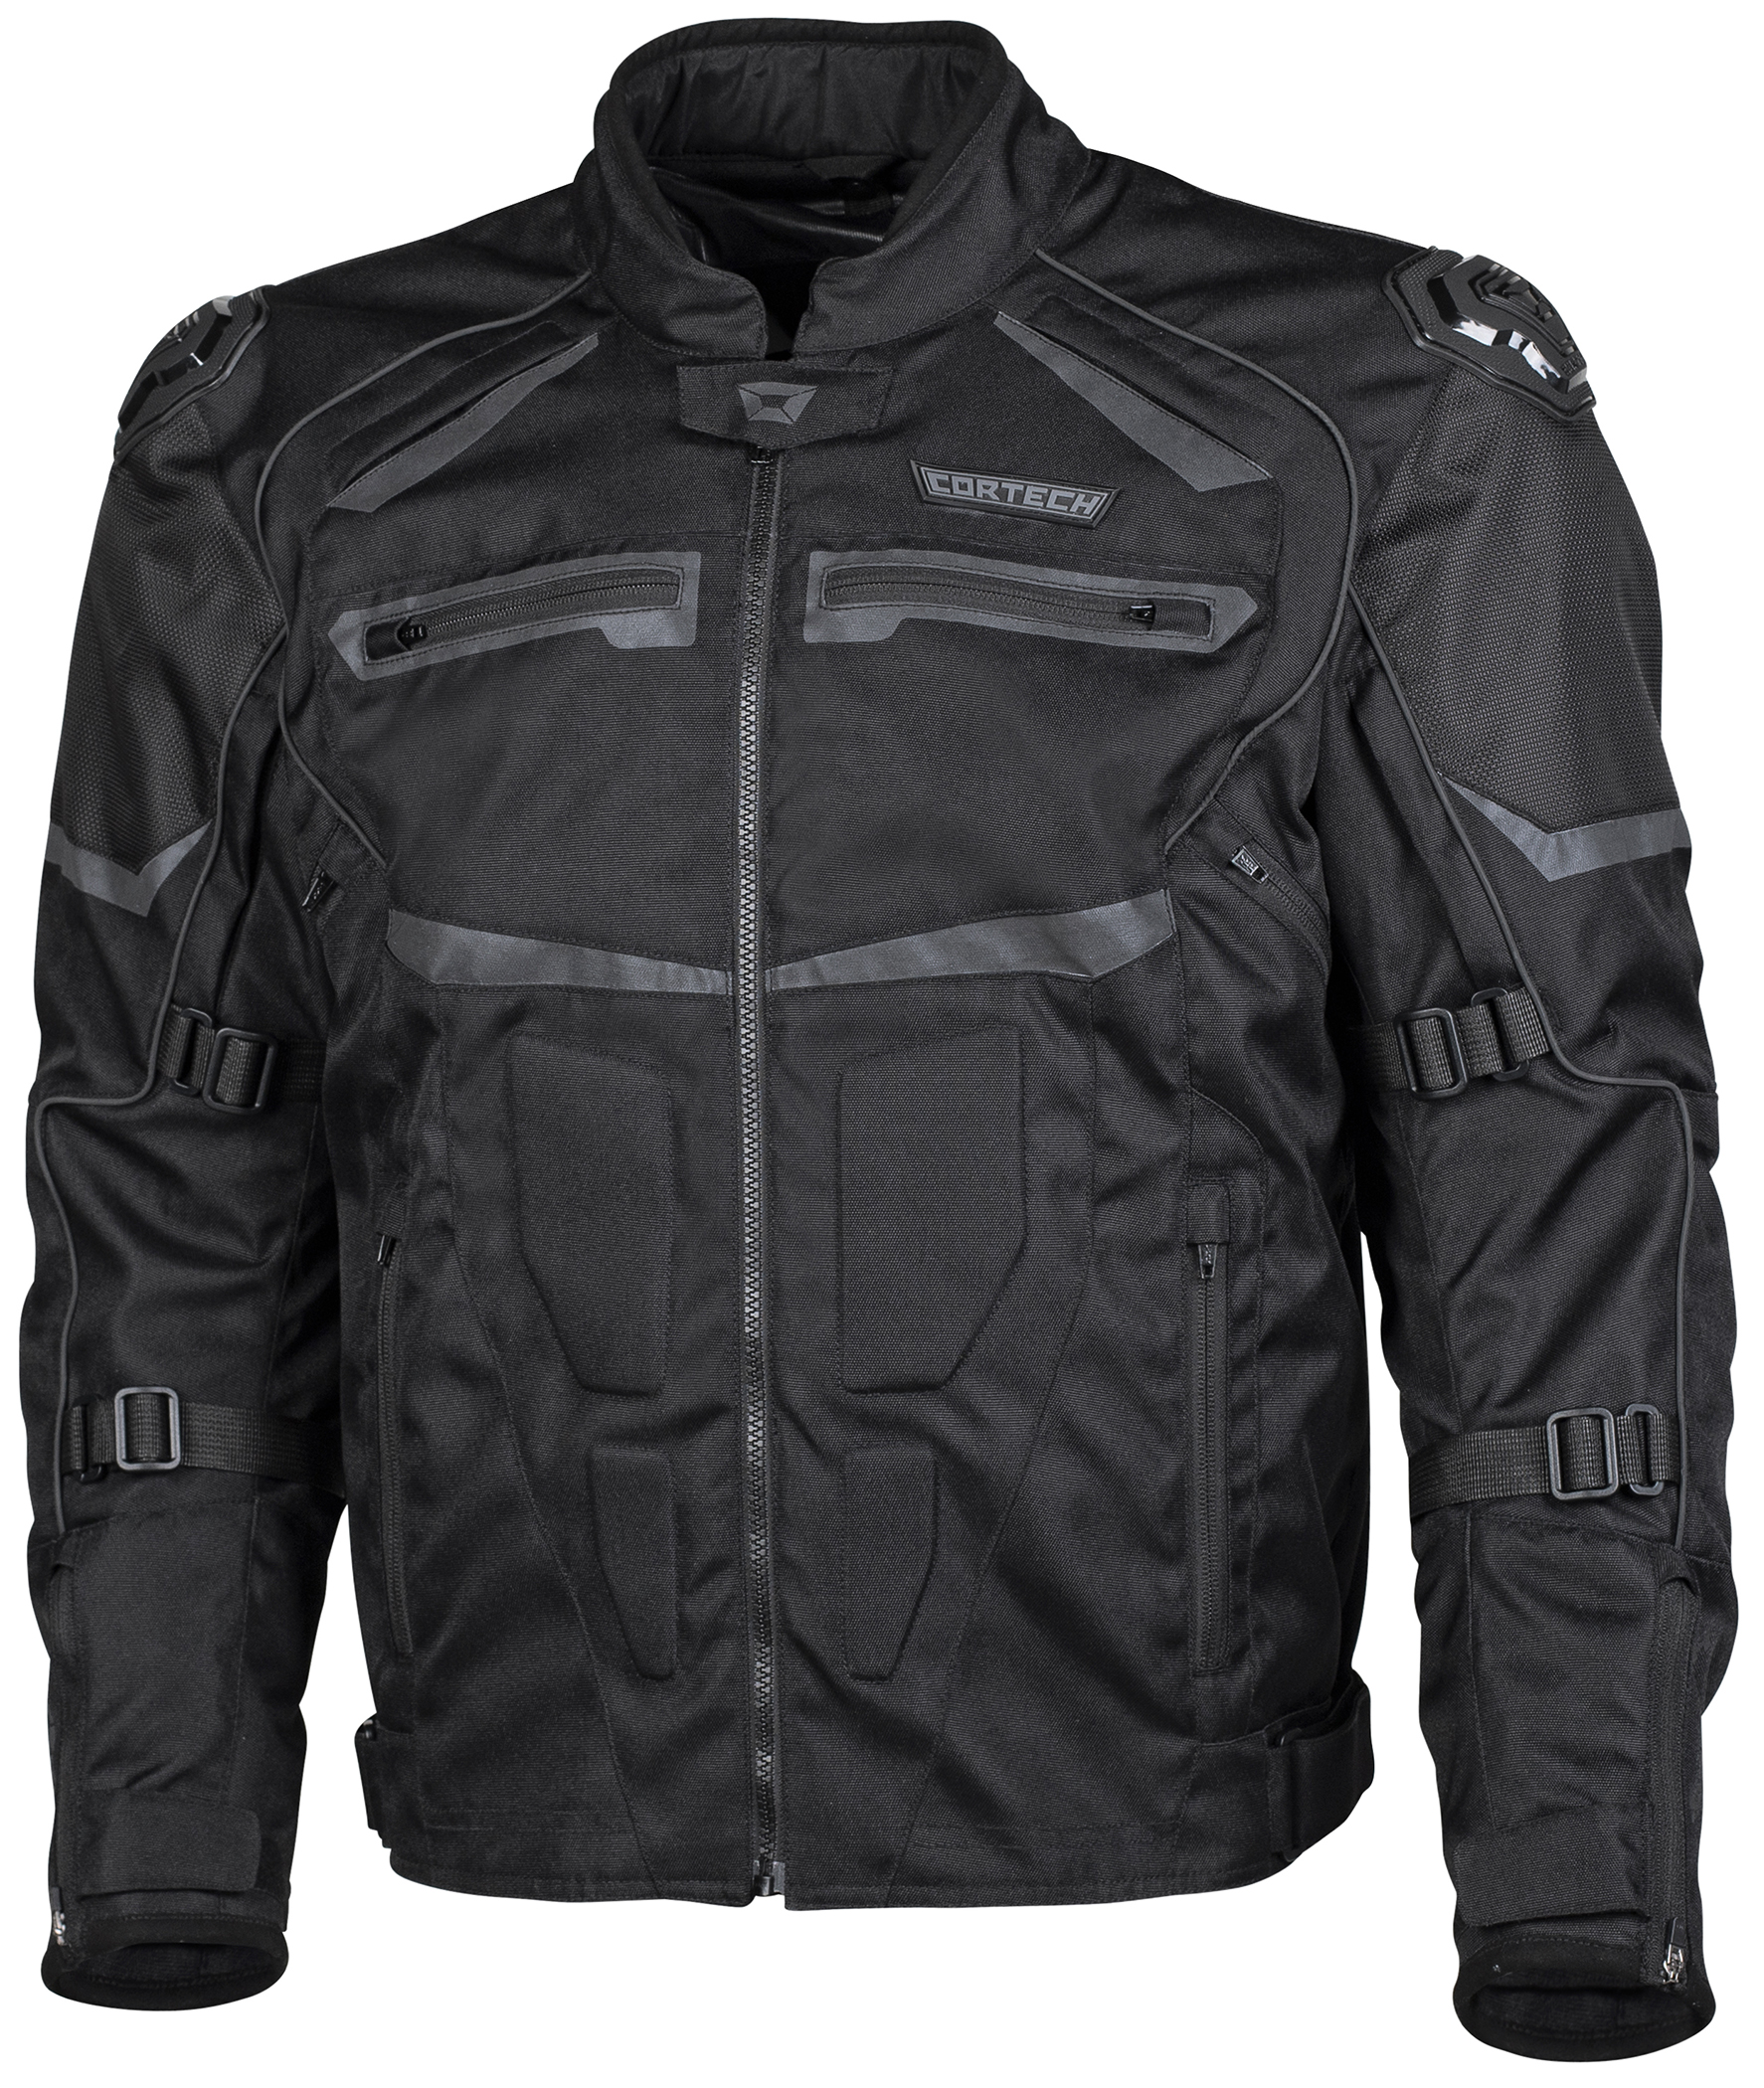 Hyper-Tec Armored Motorcycle Riding Jacket Black 3X-Large - Click Image to Close